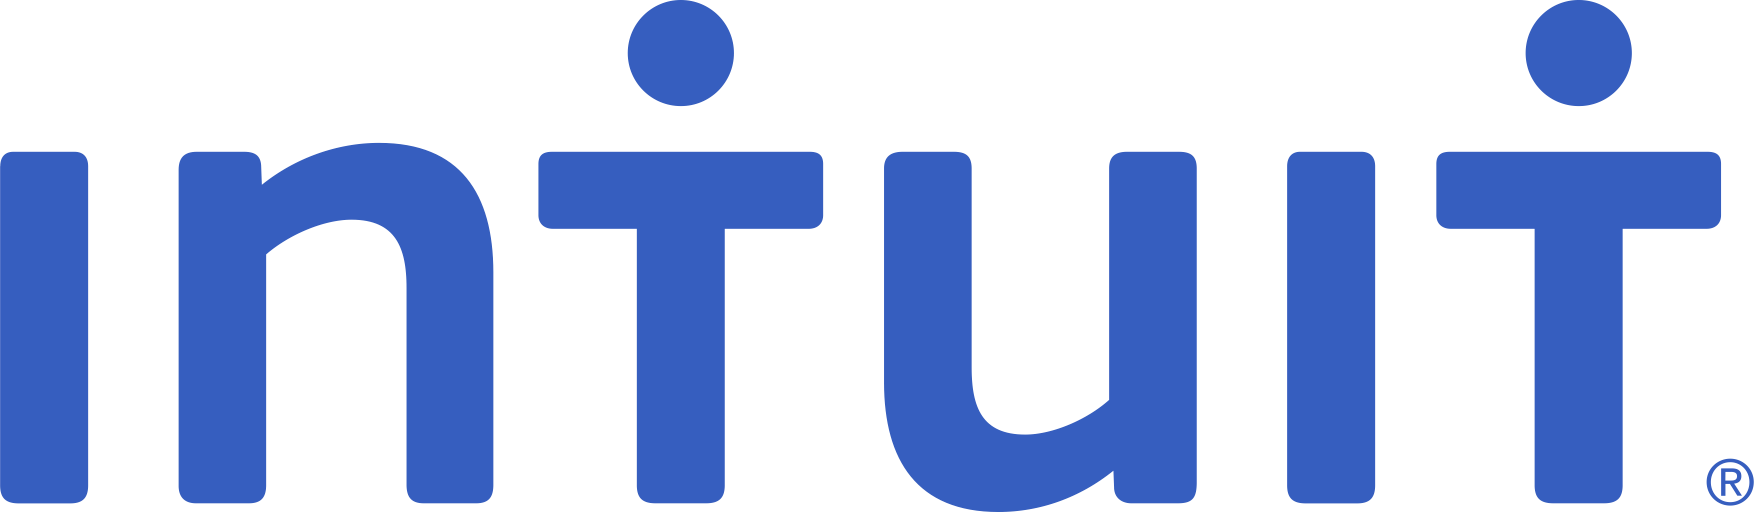 intuit.png